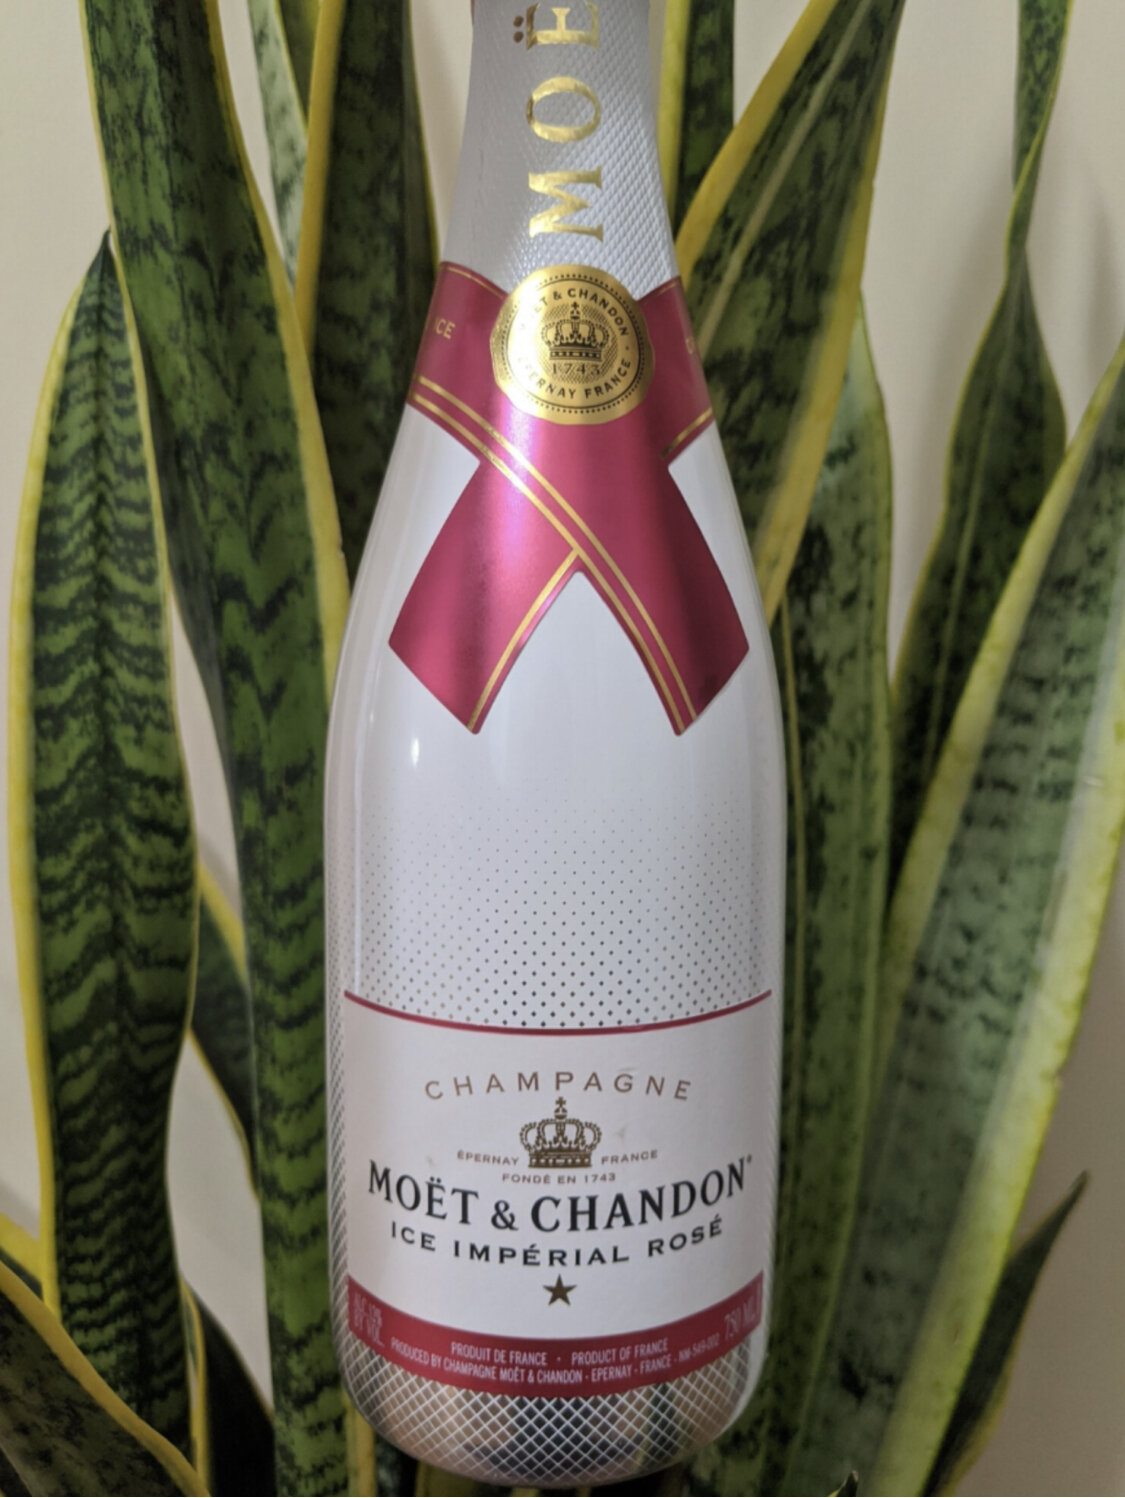 Moet & Chandon Imperial, Rose Imperial, Ice Imperial and Nectar Imperi